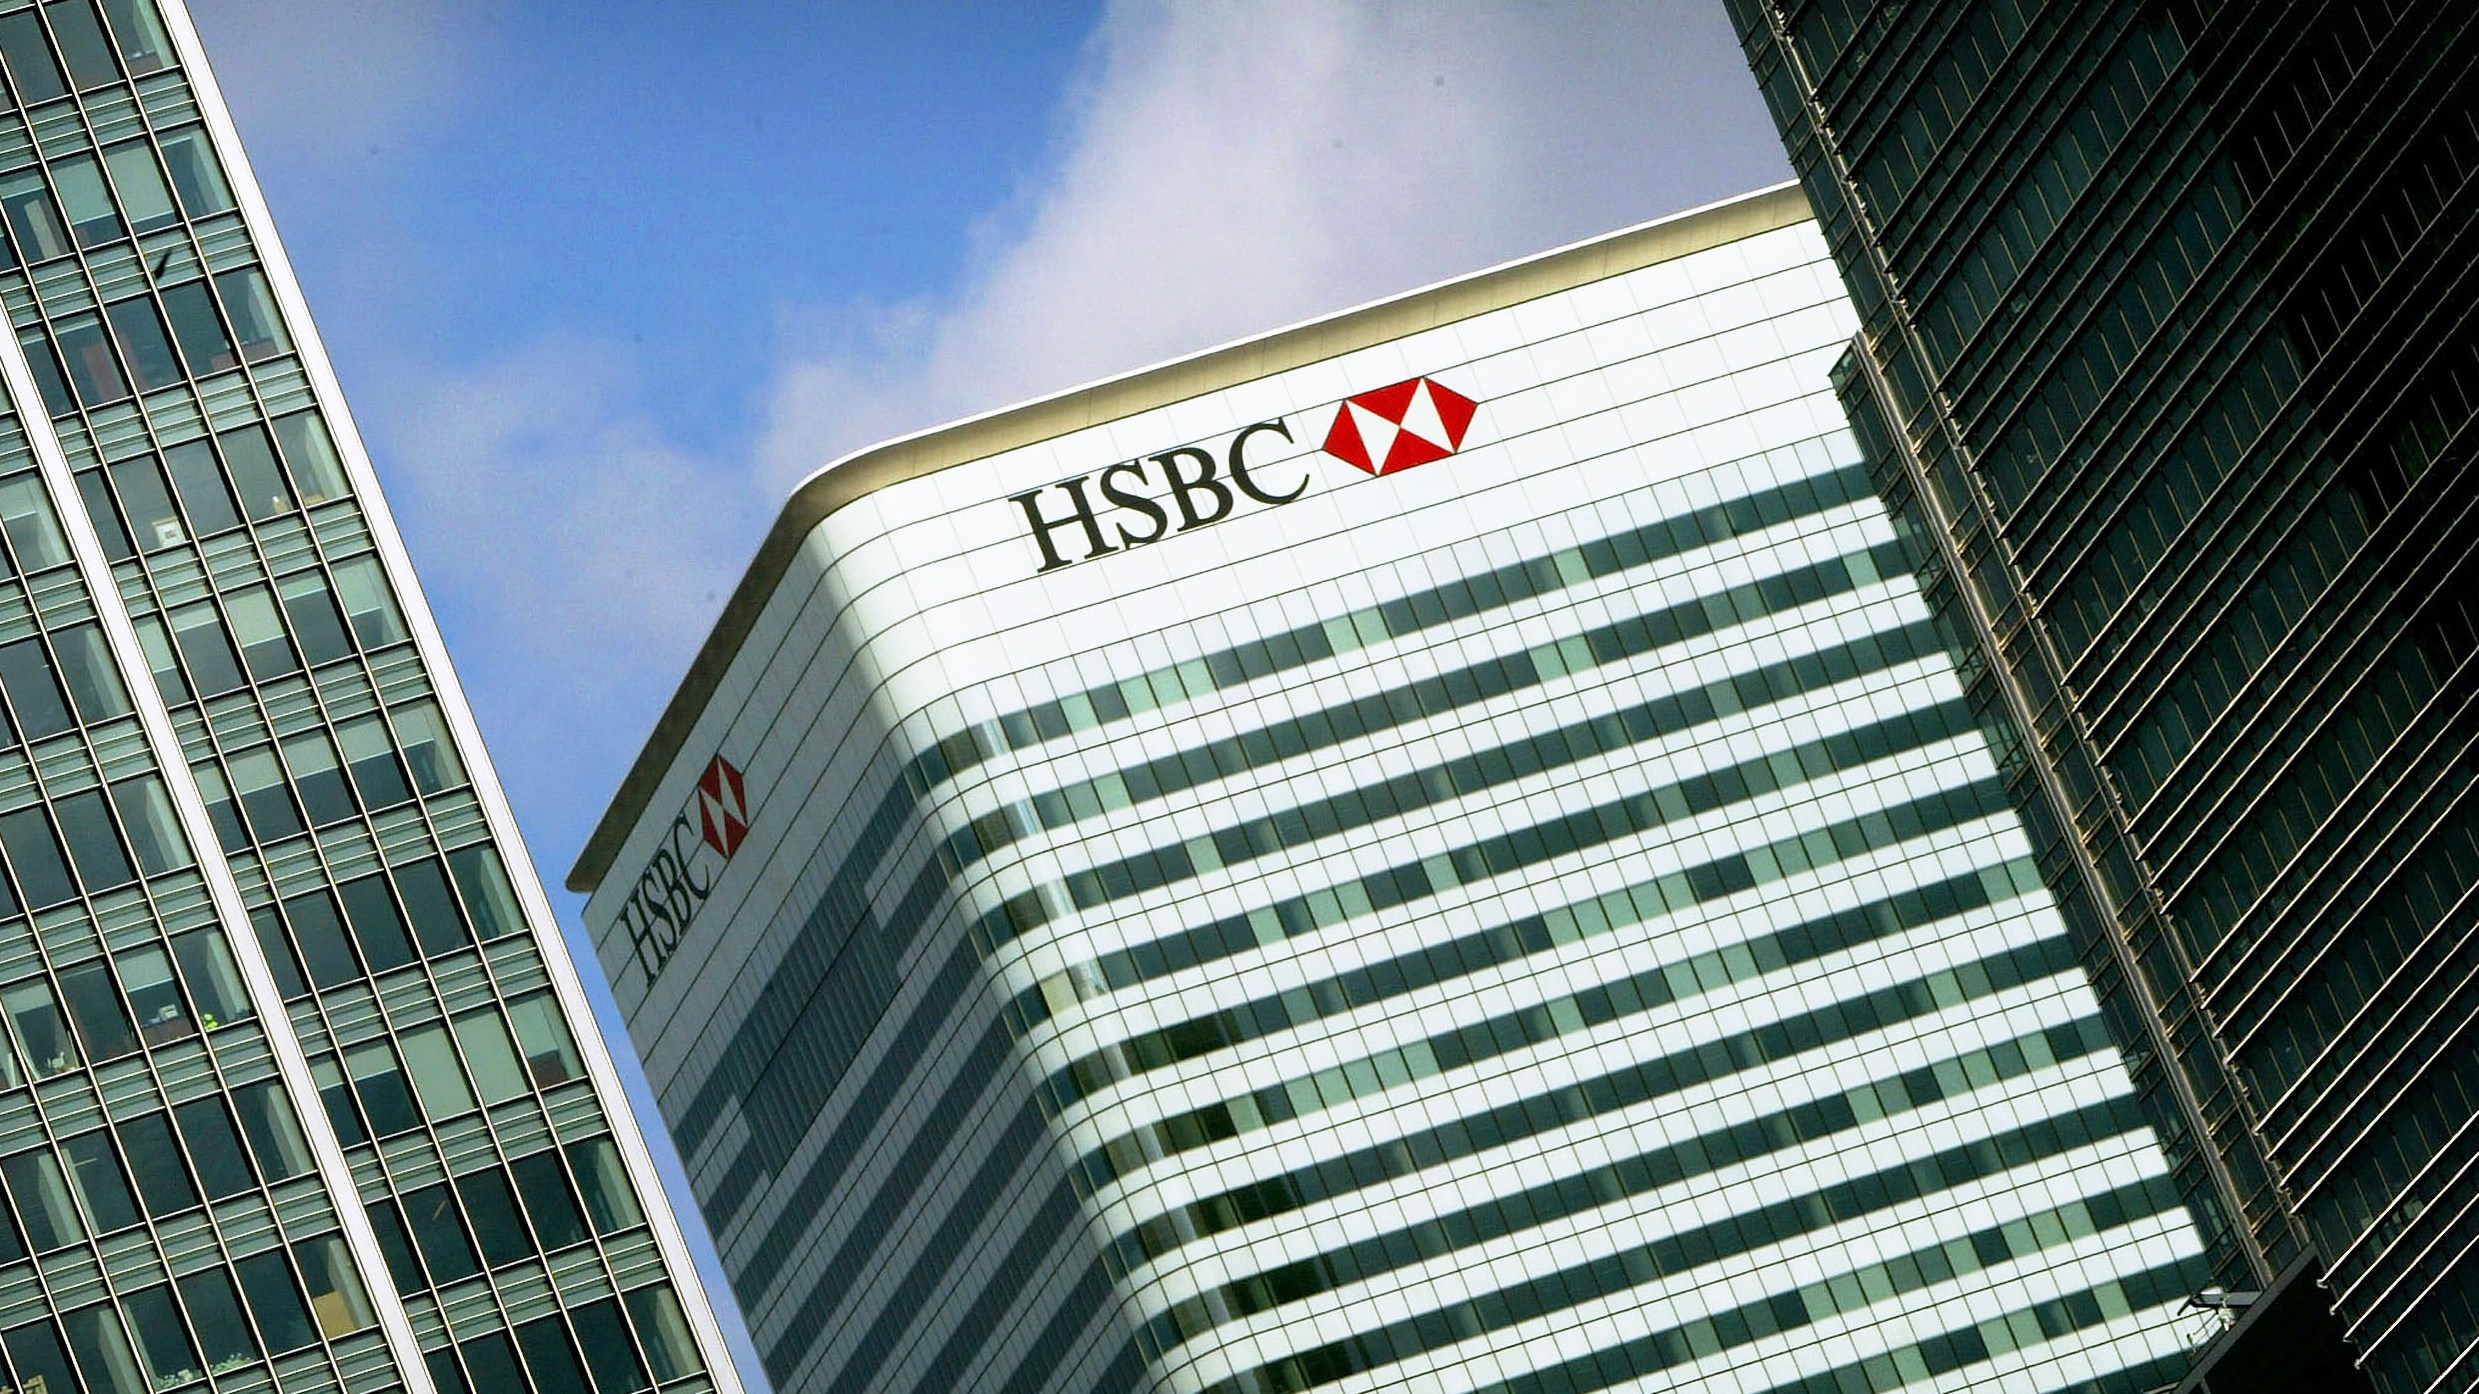 HSBC is Europe’s biggest bank, with a vast business in Asia